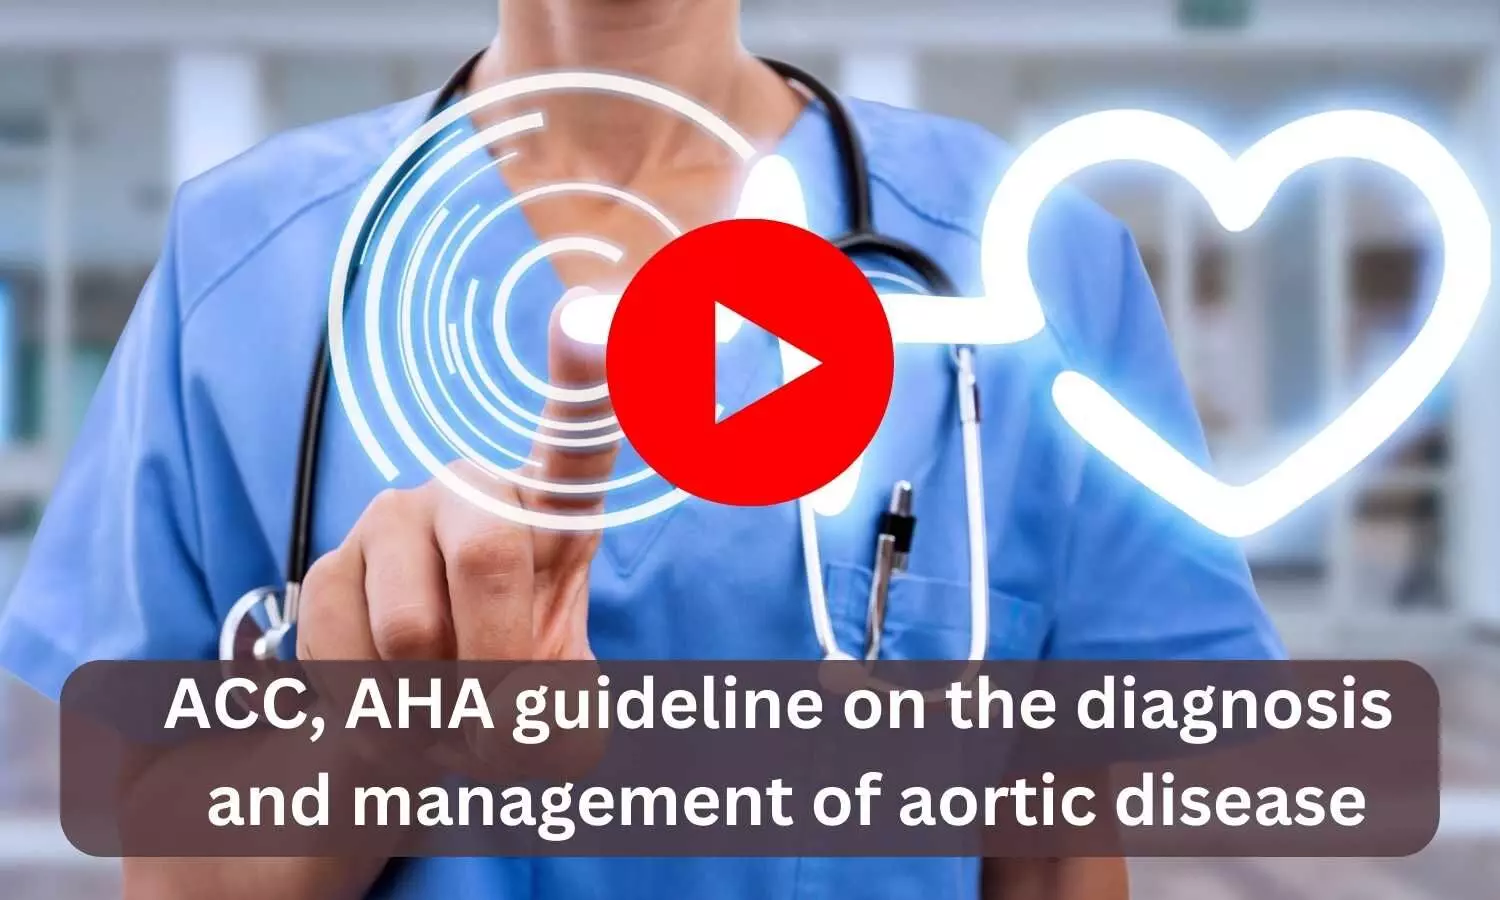 ACC, AHA guideline on the diagnosis and management of aortic disease